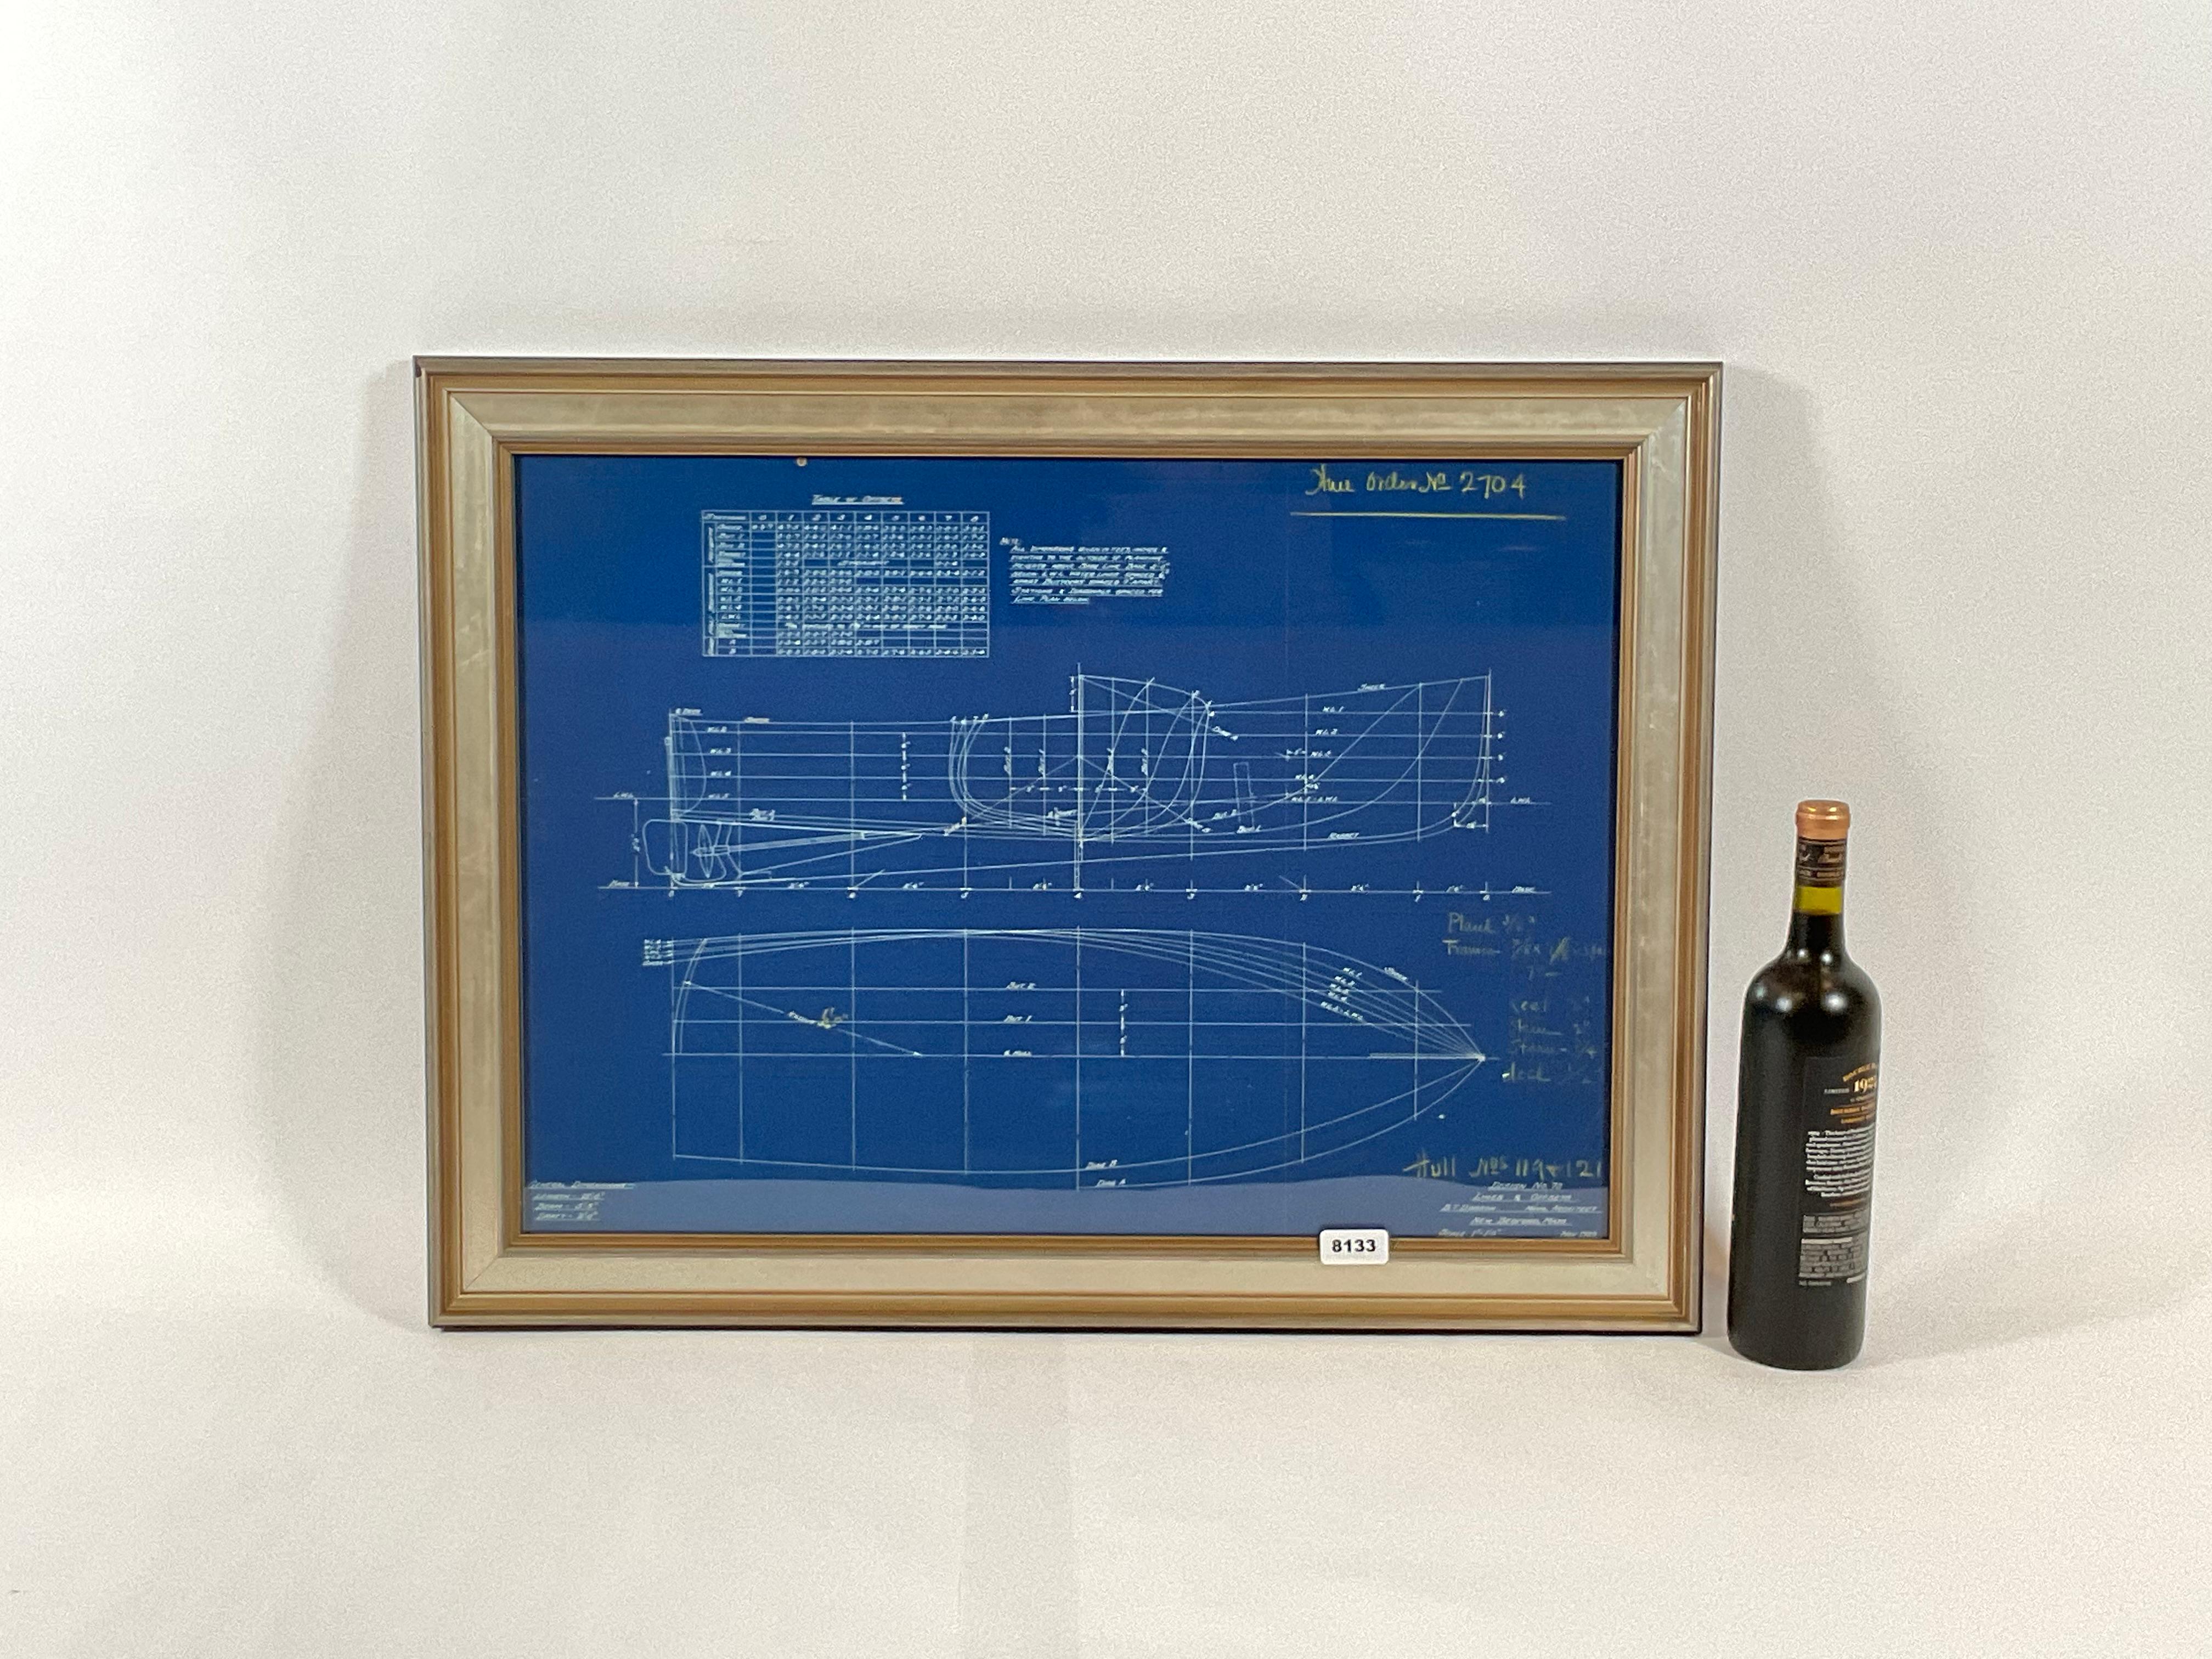 Original blueprint by naval architect Benjamin Dobson. This is identified as hull nos. 119 and 121, showing lines and offsets. This is a rich blue color, white outlines, also with handwritten details in yellow crayon. Dated lower right November